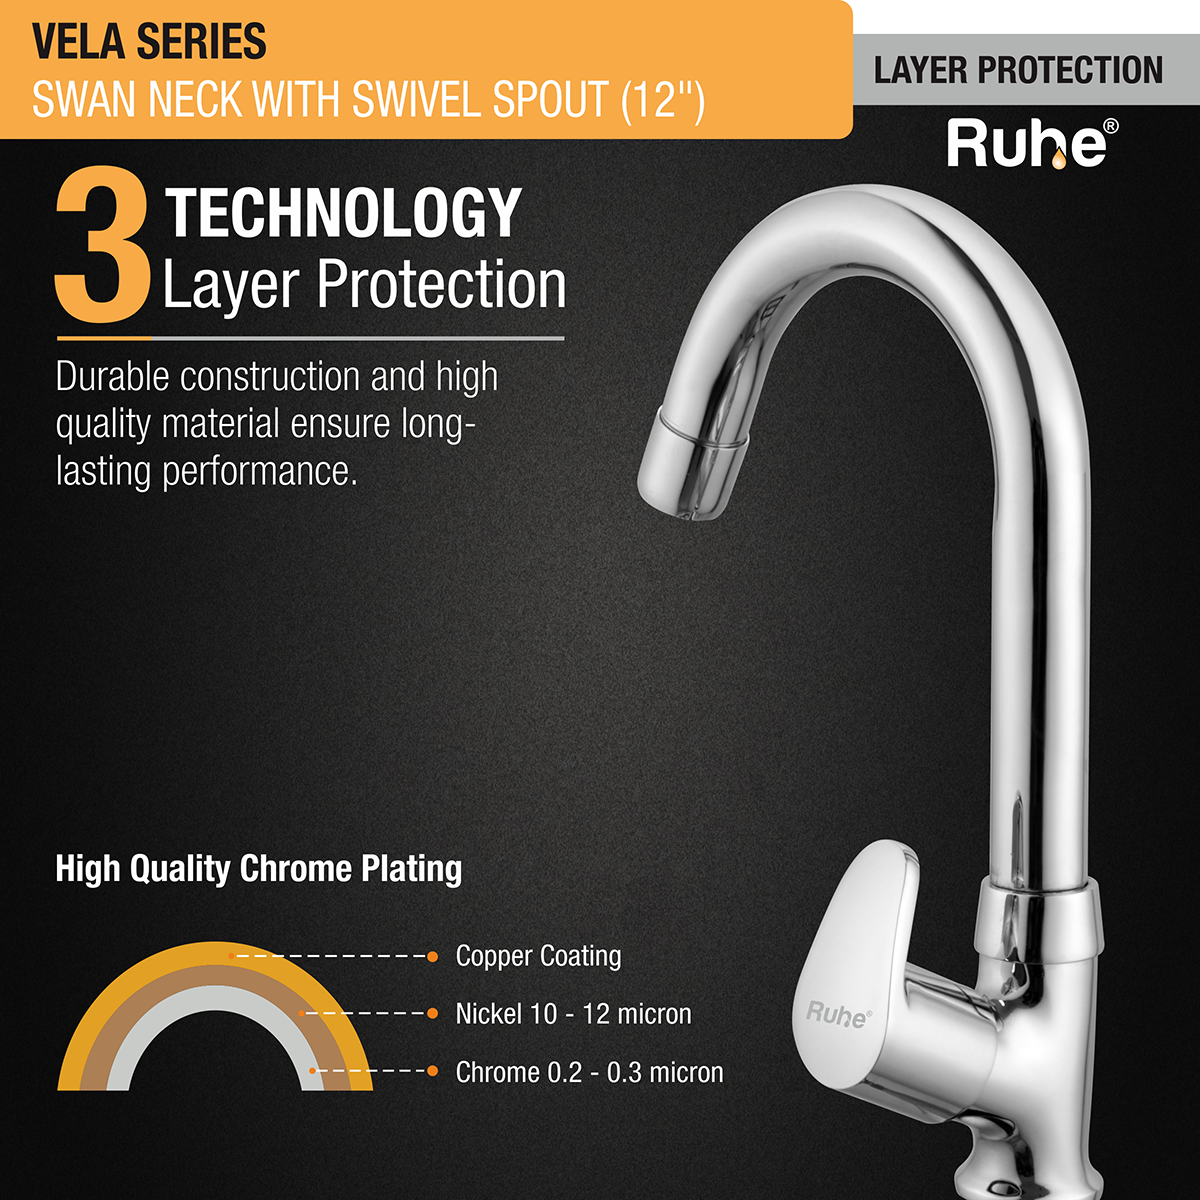 Vela Swan Neck with Small (12 inches) Round Swivel Spout Brass Faucet 3 layer protection